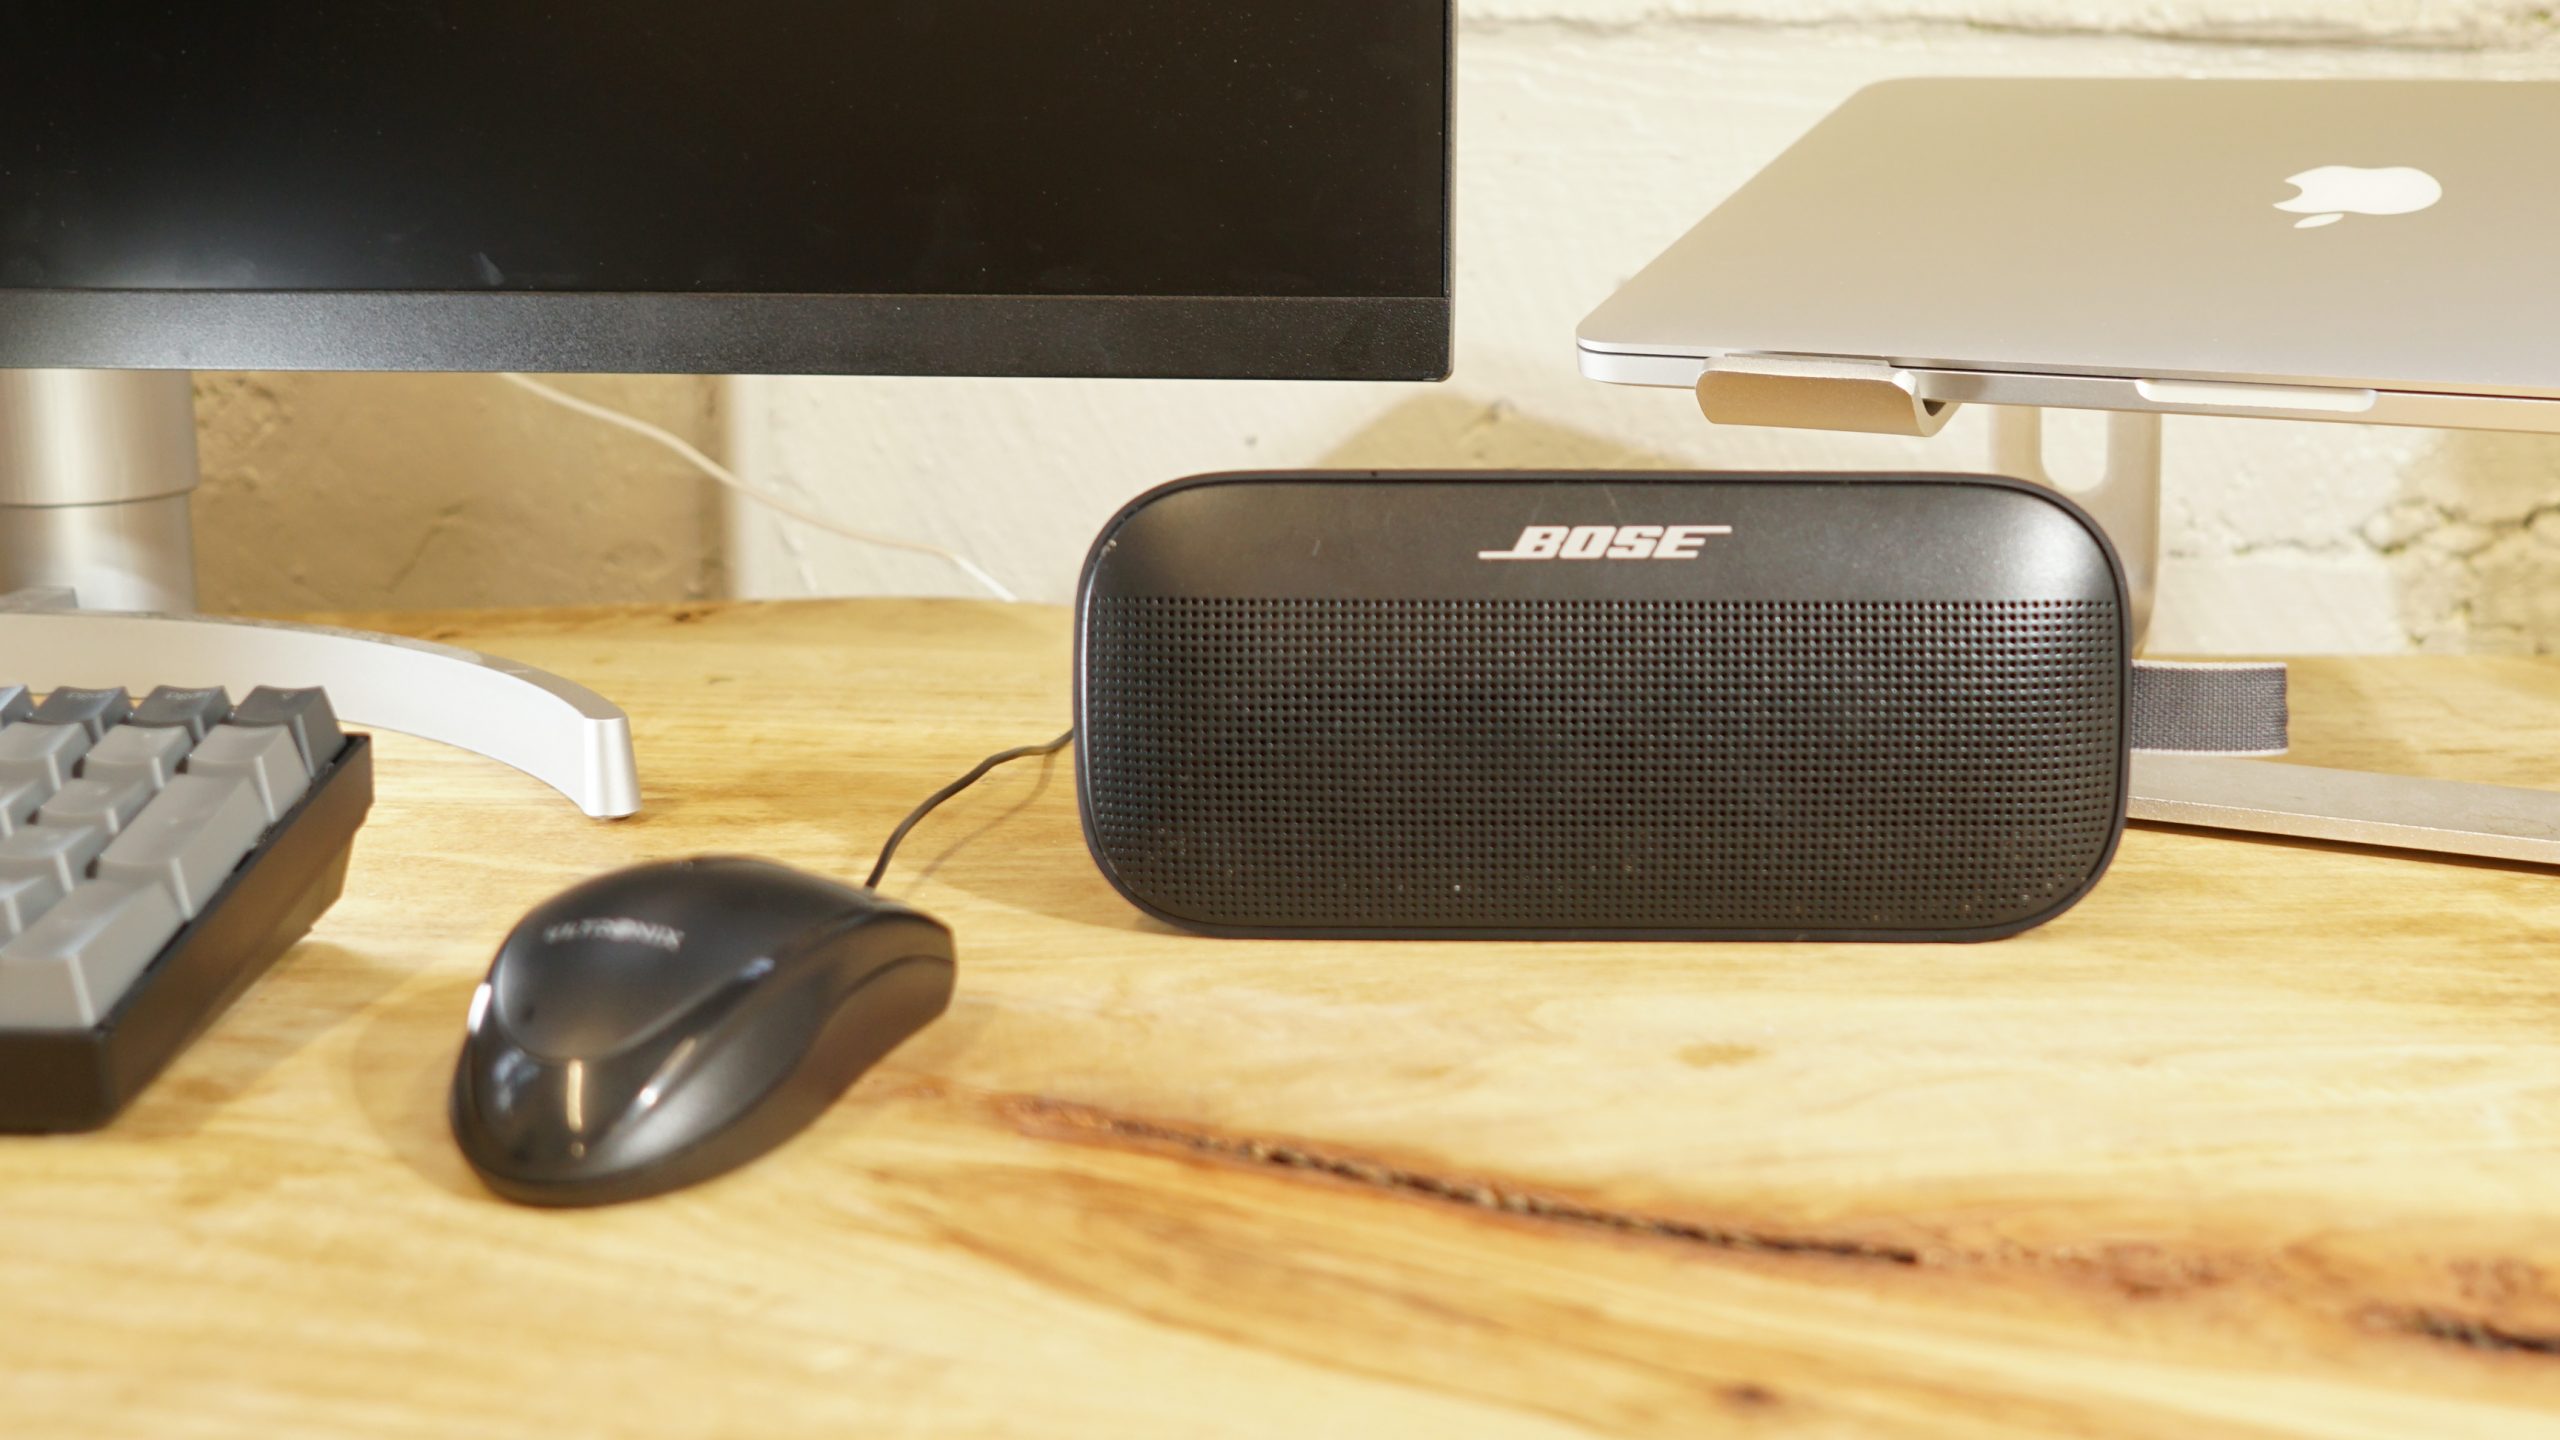 A photo of the Bose SoundLink Flex Bluetooth speaker sitting on a desk next to a monitor and laptop visible in the background and a mouse and keyboard to the left.